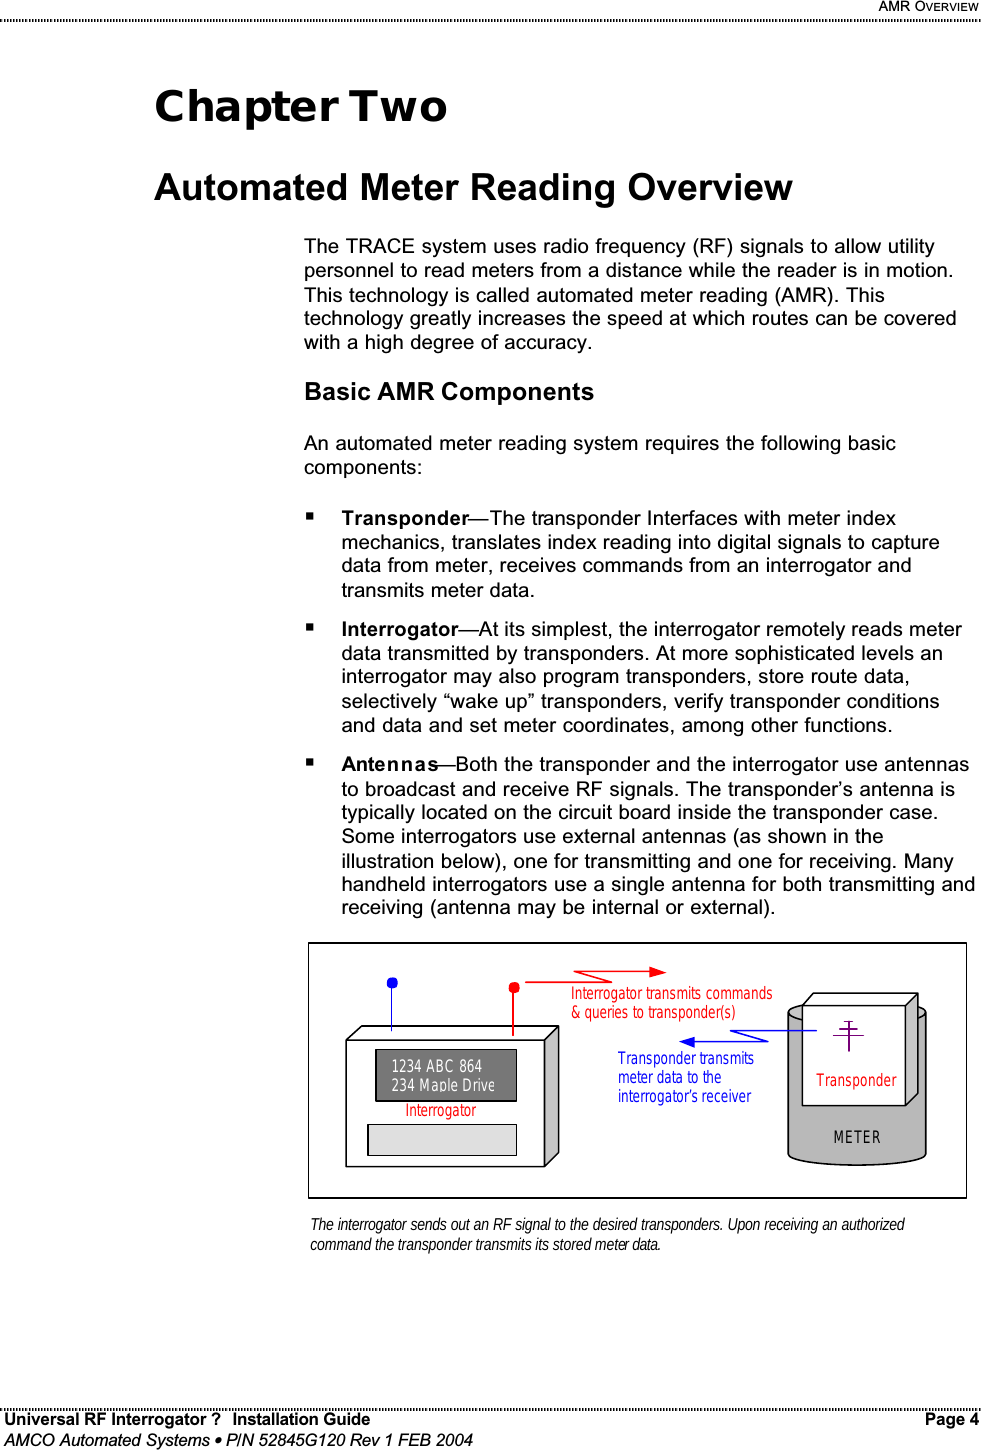     AMR OVERVIEW Universal RF Interrogator ?  Installation Guide    Page 4  AMCO Automated Systems • P/N 52845G120 Rev 1 FEB 2004                                                                                                                                 Chapter Two  Automated Meter Reading Overview  The TRACE system uses radio frequency (RF) signals to allow utility personnel to read meters from a distance while the reader is in motion. This technology is called automated meter reading (AMR). This technology greatly increases the speed at which routes can be covered with a high degree of accuracy.  Basic AMR Components  An automated meter reading system requires the following basic components:  ! Transponder—The transponder Interfaces with meter index mechanics, translates index reading into digital signals to capture data from meter, receives commands from an interrogator and transmits meter data. ! Interrogator—At its simplest, the interrogator remotely reads meter data transmitted by transponders. At more sophisticated levels an interrogator may also program transponders, store route data, selectively “wake up” transponders, verify transponder conditions and data and set meter coordinates, among other functions. ! Antennas—Both the transponder and the interrogator use antennas to broadcast and receive RF signals. The transponder’s antenna is typically located on the circuit board inside the transponder case. Some interrogators use external antennas (as shown in the illustration below), one for transmitting and one for receiving. Many handheld interrogators use a single antenna for both transmitting and receiving (antenna may be internal or external).                Transponder METERThe interrogator sends out an RF signal to the desired transponders. Upon receiving an authorized command the transponder transmits its stored meter data.  1234 ABC 864 234 Maple DriveInterrogatorInterrogator transmits commands &amp; queries to transponder(s)  Transponder transmits meter data to the interrogator’s receiver  